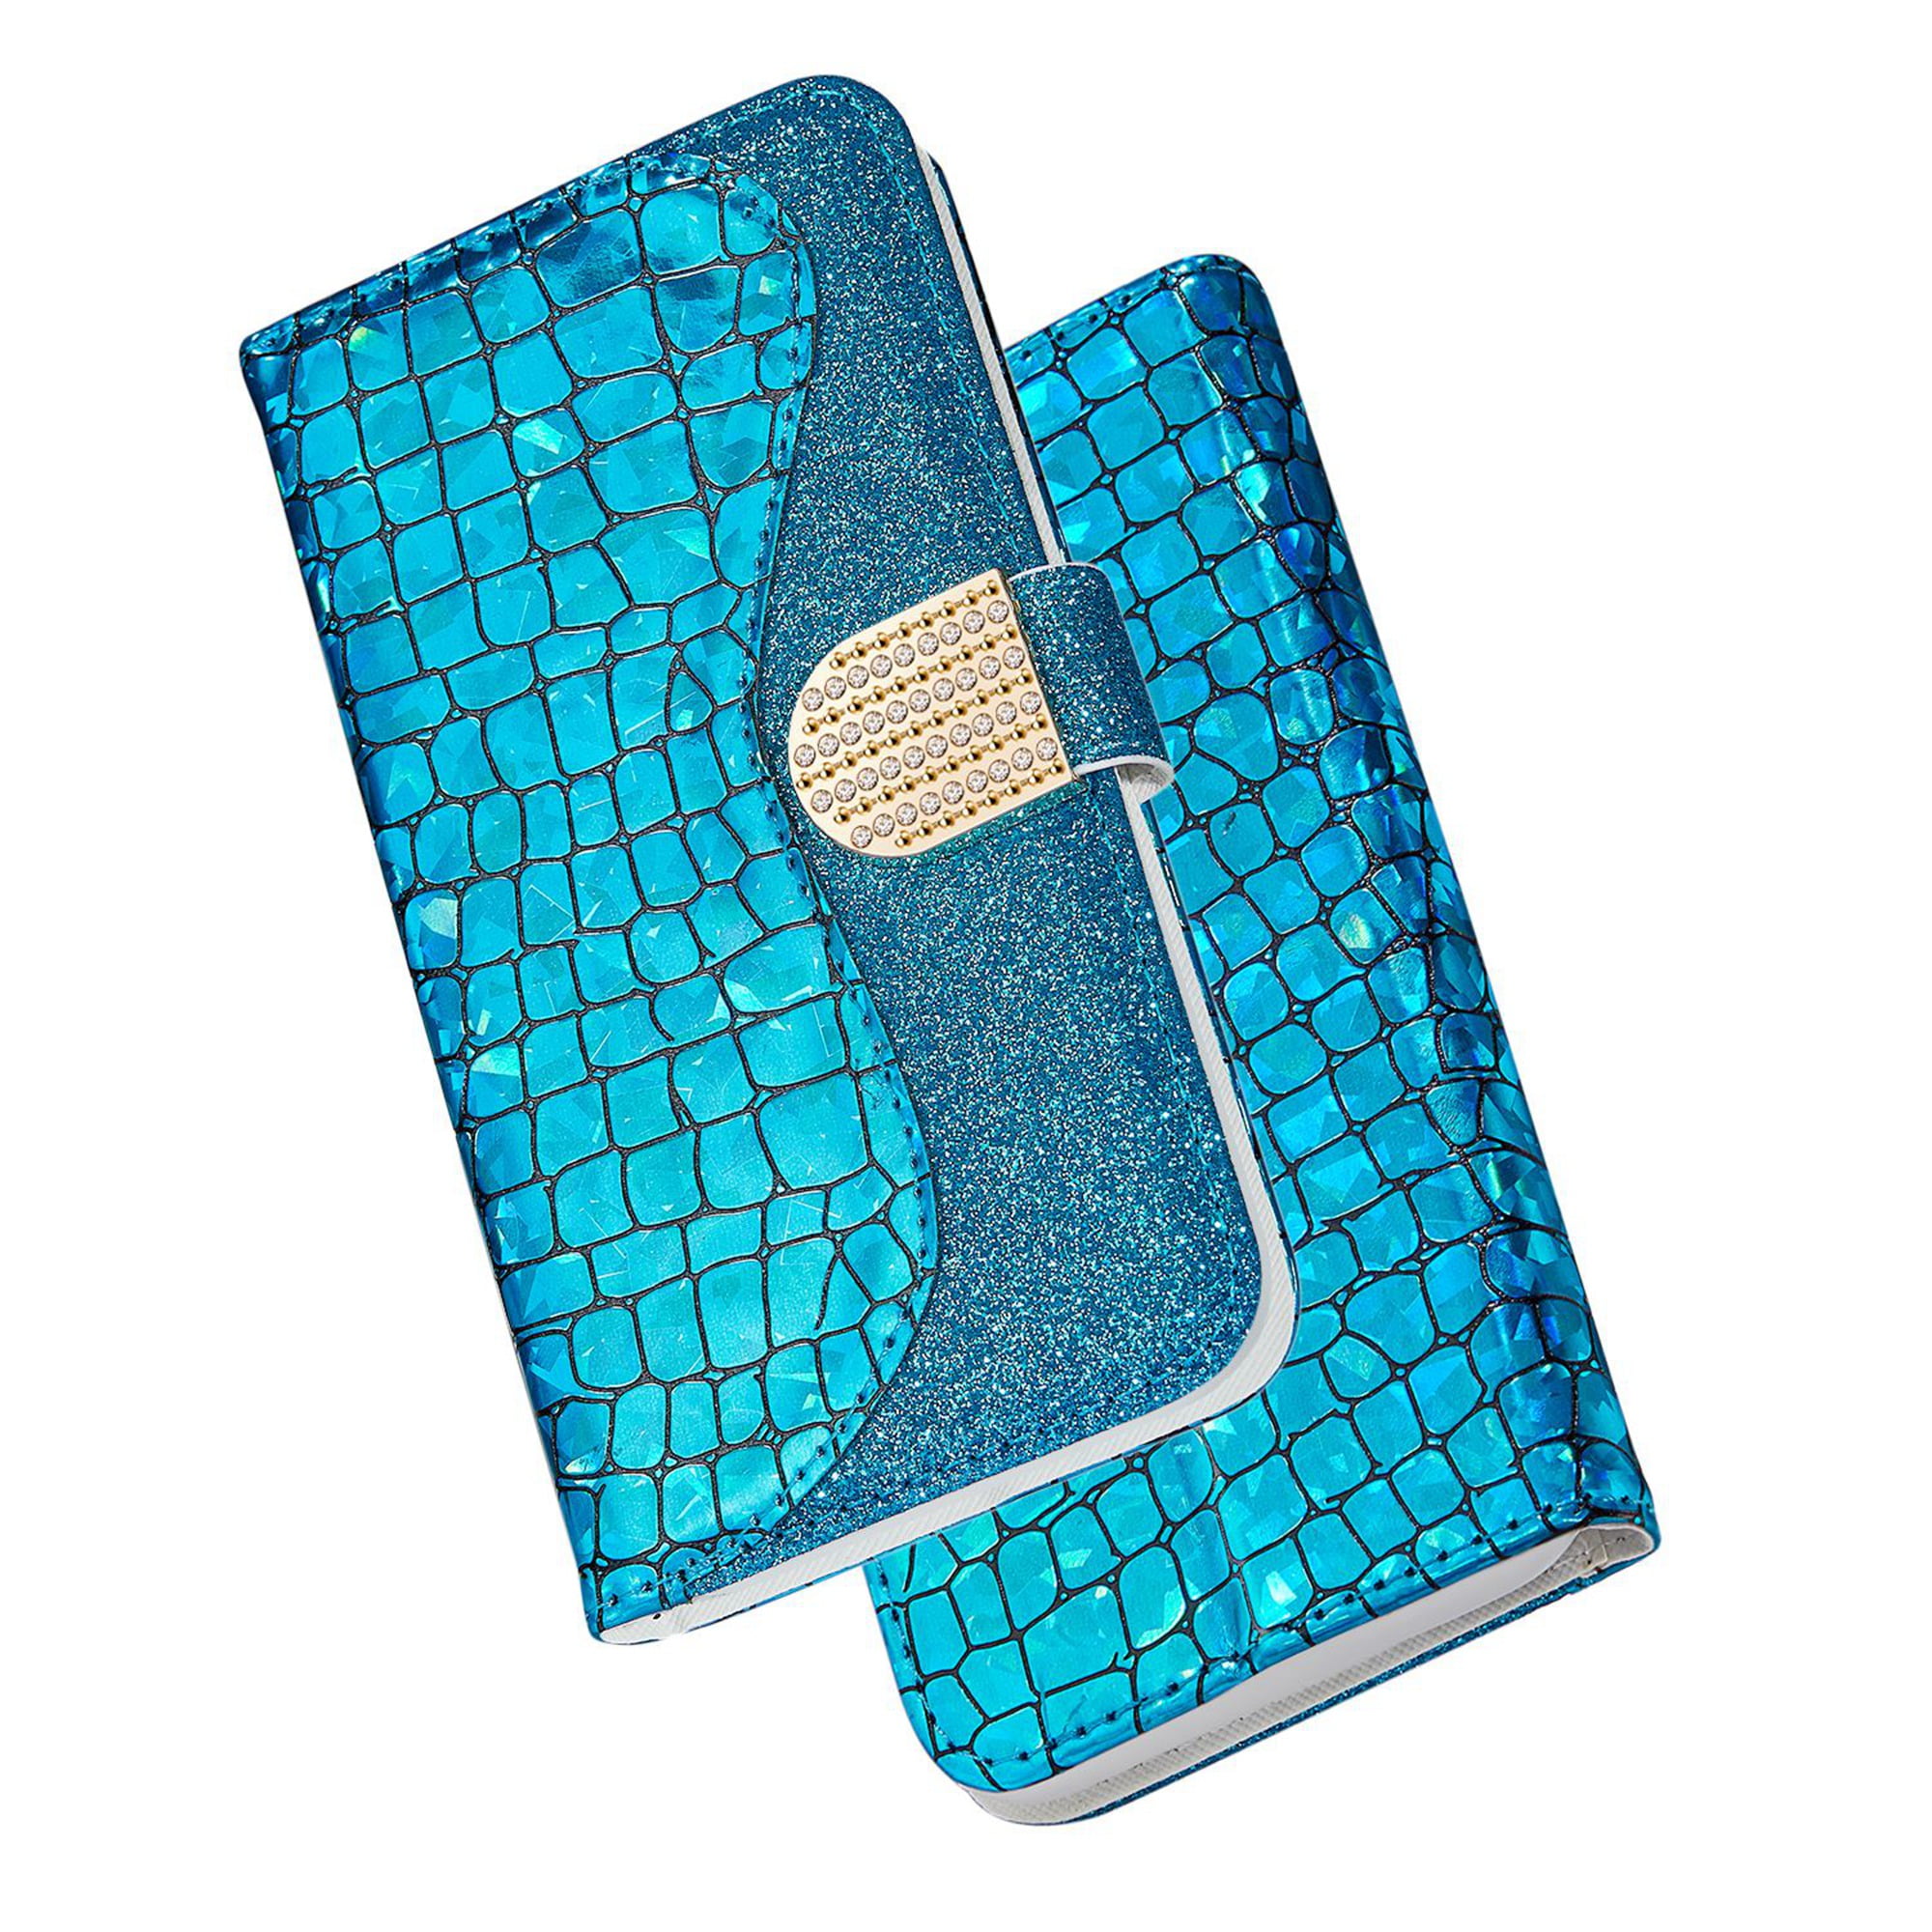 for Galaxy S6 Case Glitter Sequin Shockproof Protective Soft PU Leather Wallet Case with Card Slots Book Design Flip Case Cover for Galaxy S6,Blue Magnetic closure 